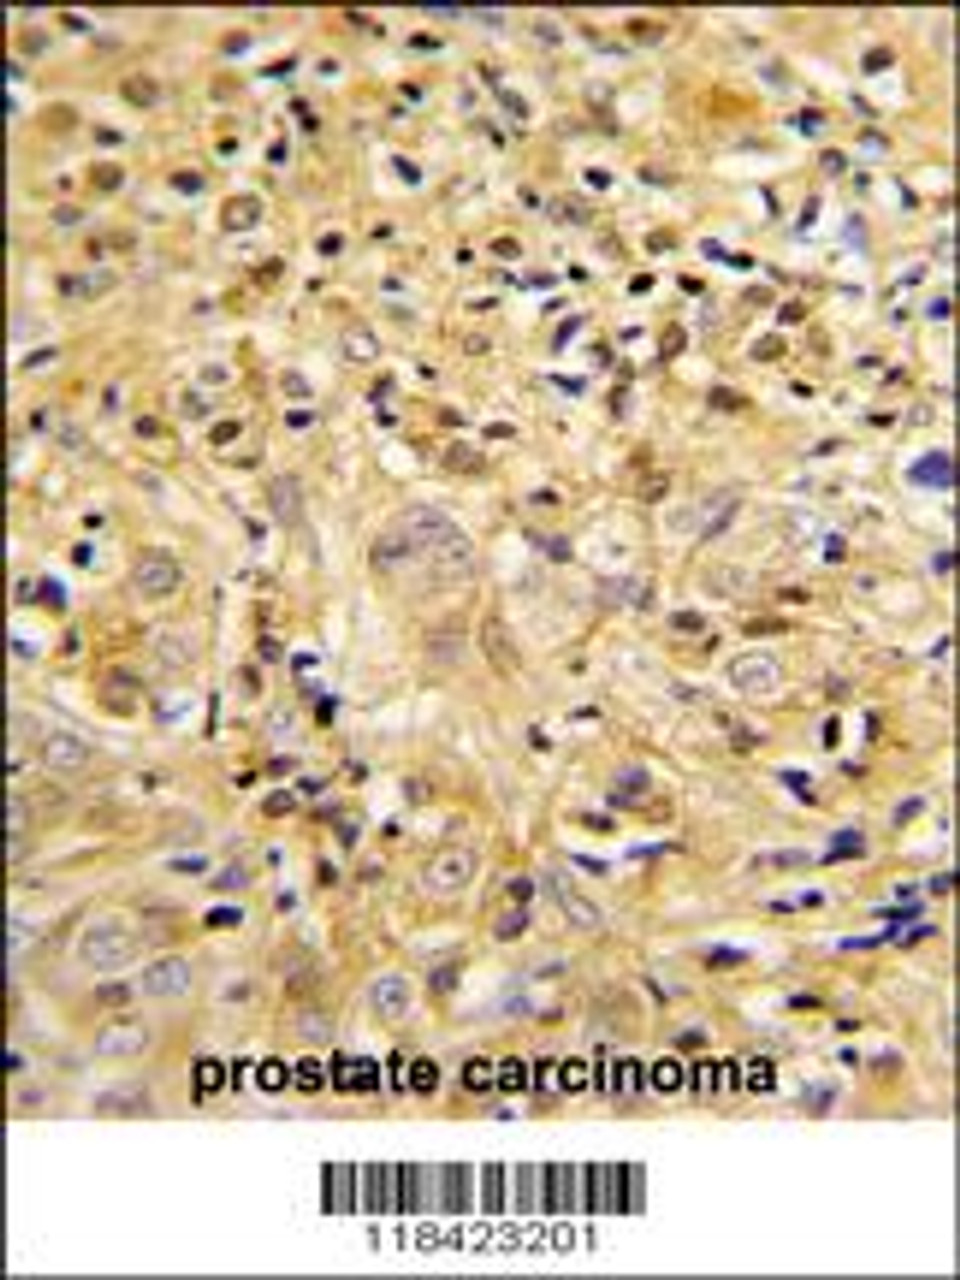 Formalin-fixed and paraffin-embedded human prostate carcinoma reacted with LUM Antibody, which was peroxidase-conjugated to the secondary antibody, followed by DAB staining.